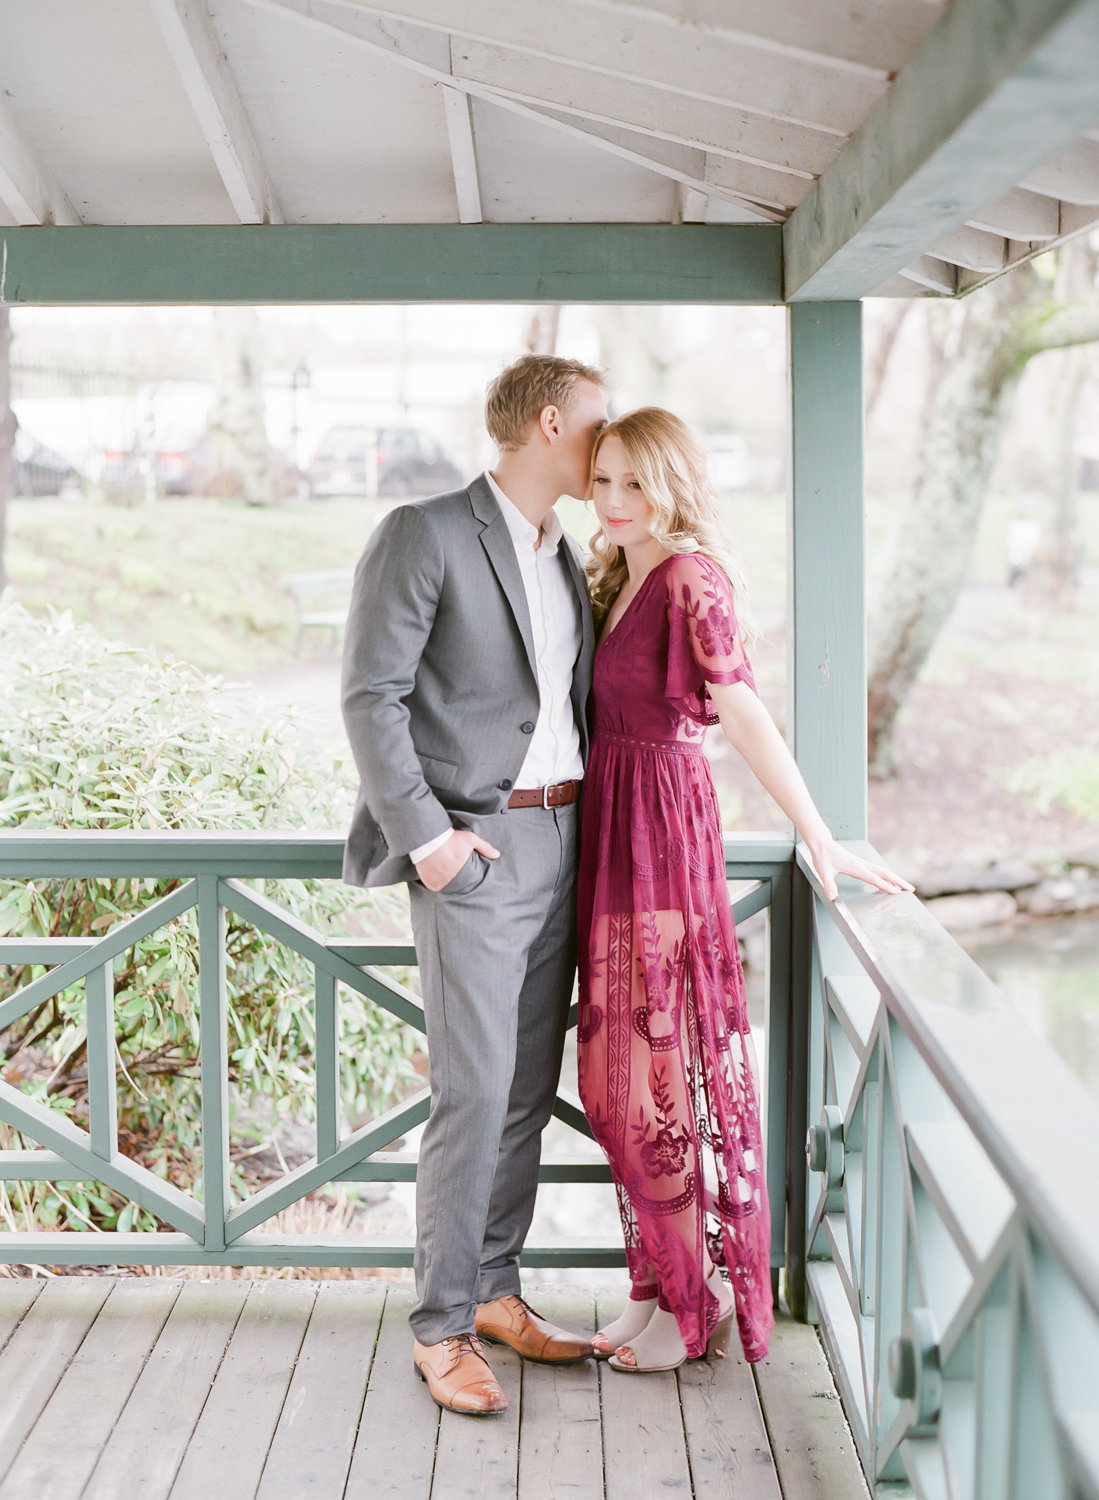 Jacqueline Anne Photography - Amanda and Brent-75